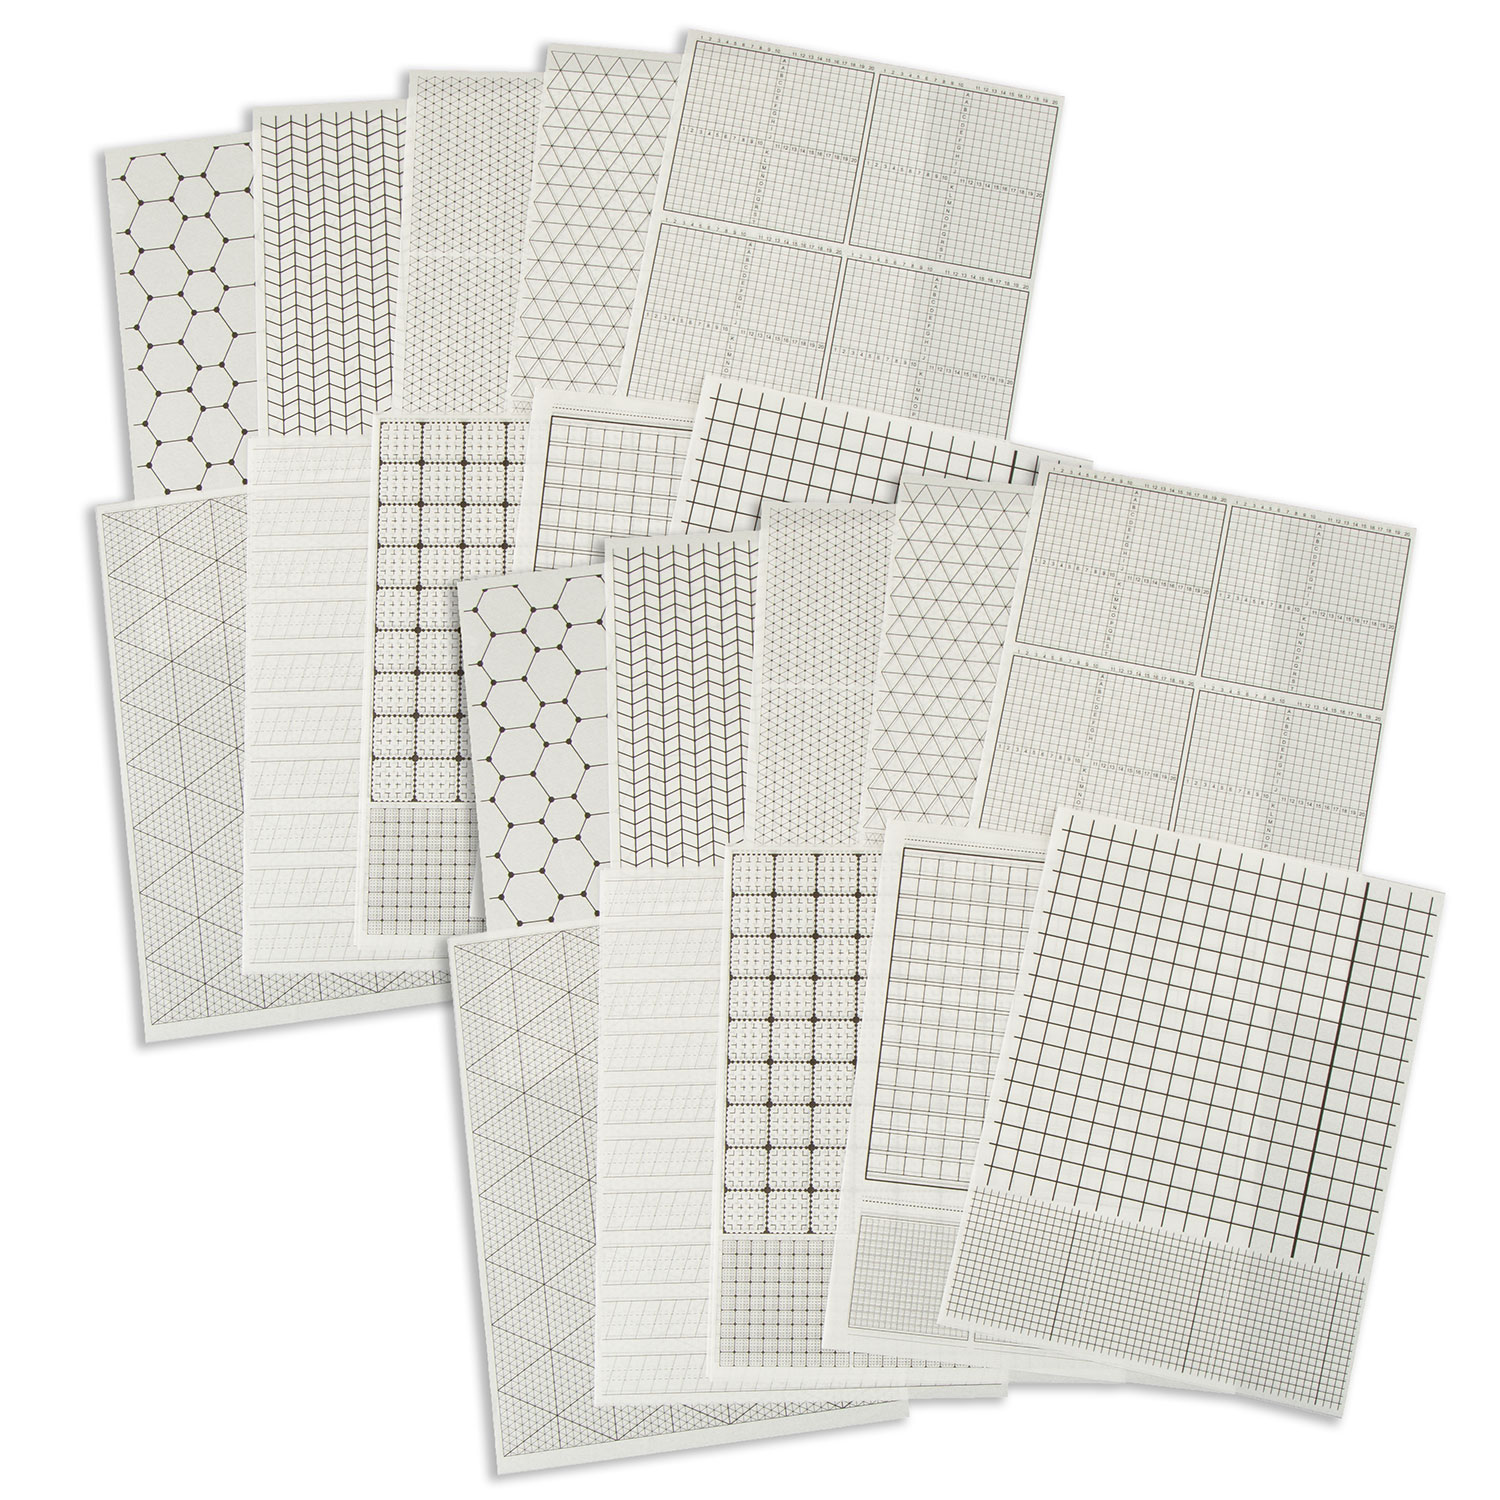 Dina Wakley 2 x Media Transparencies & Collage Papers - Pick n Mix Choose Any 2   - Collage Paper - Grid